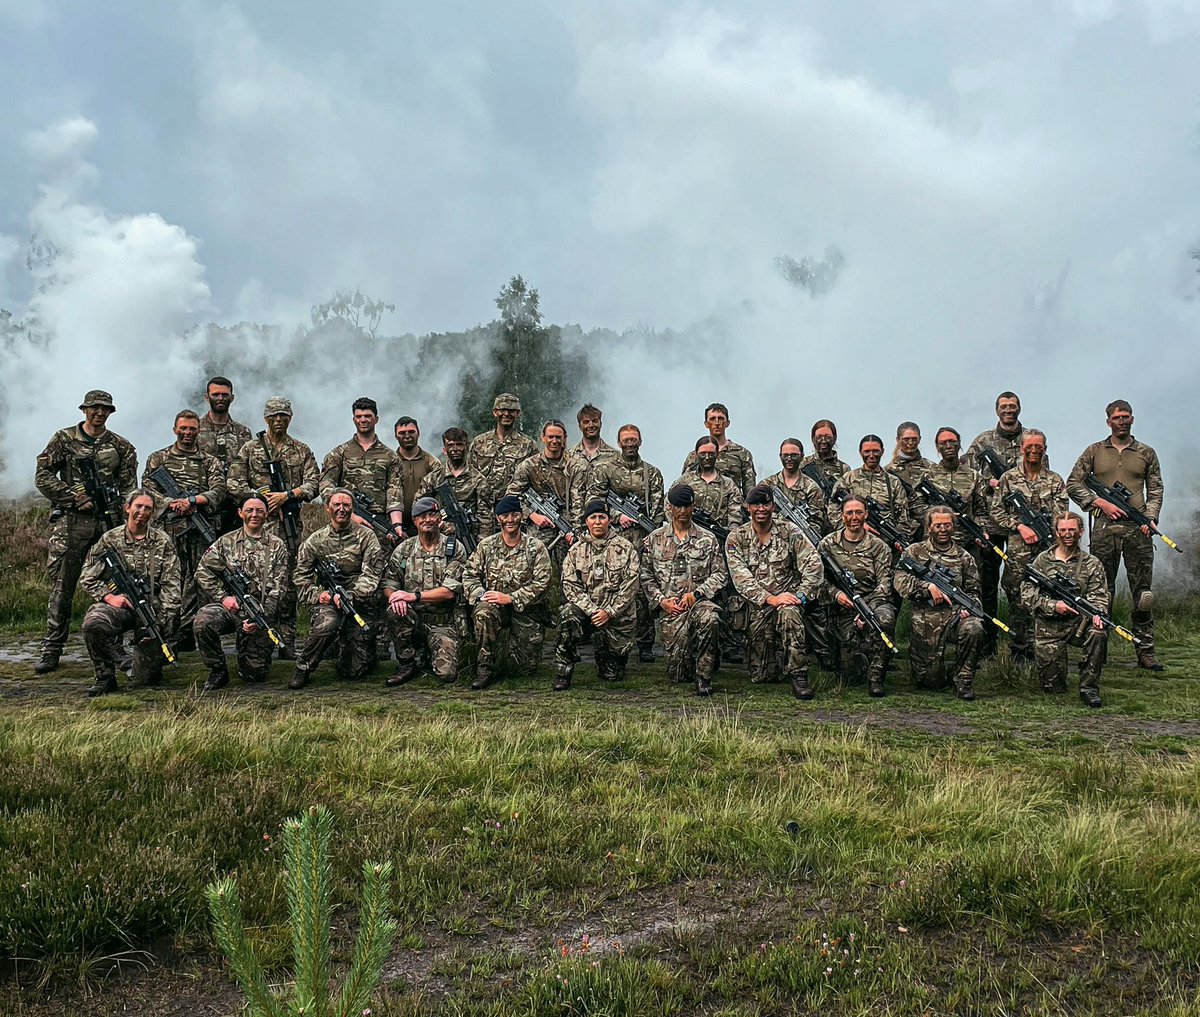 Well done to the new Lcpl’s who have passed their ALDP cadre today: The Course had a varied turnout from RAMC, RAVC, QARANC Wishing you luck in your future careers in your new leadership roles. #MakingTheBestBetter #AMS #Promotion @AMSCorpsCol @AMS_SM_1